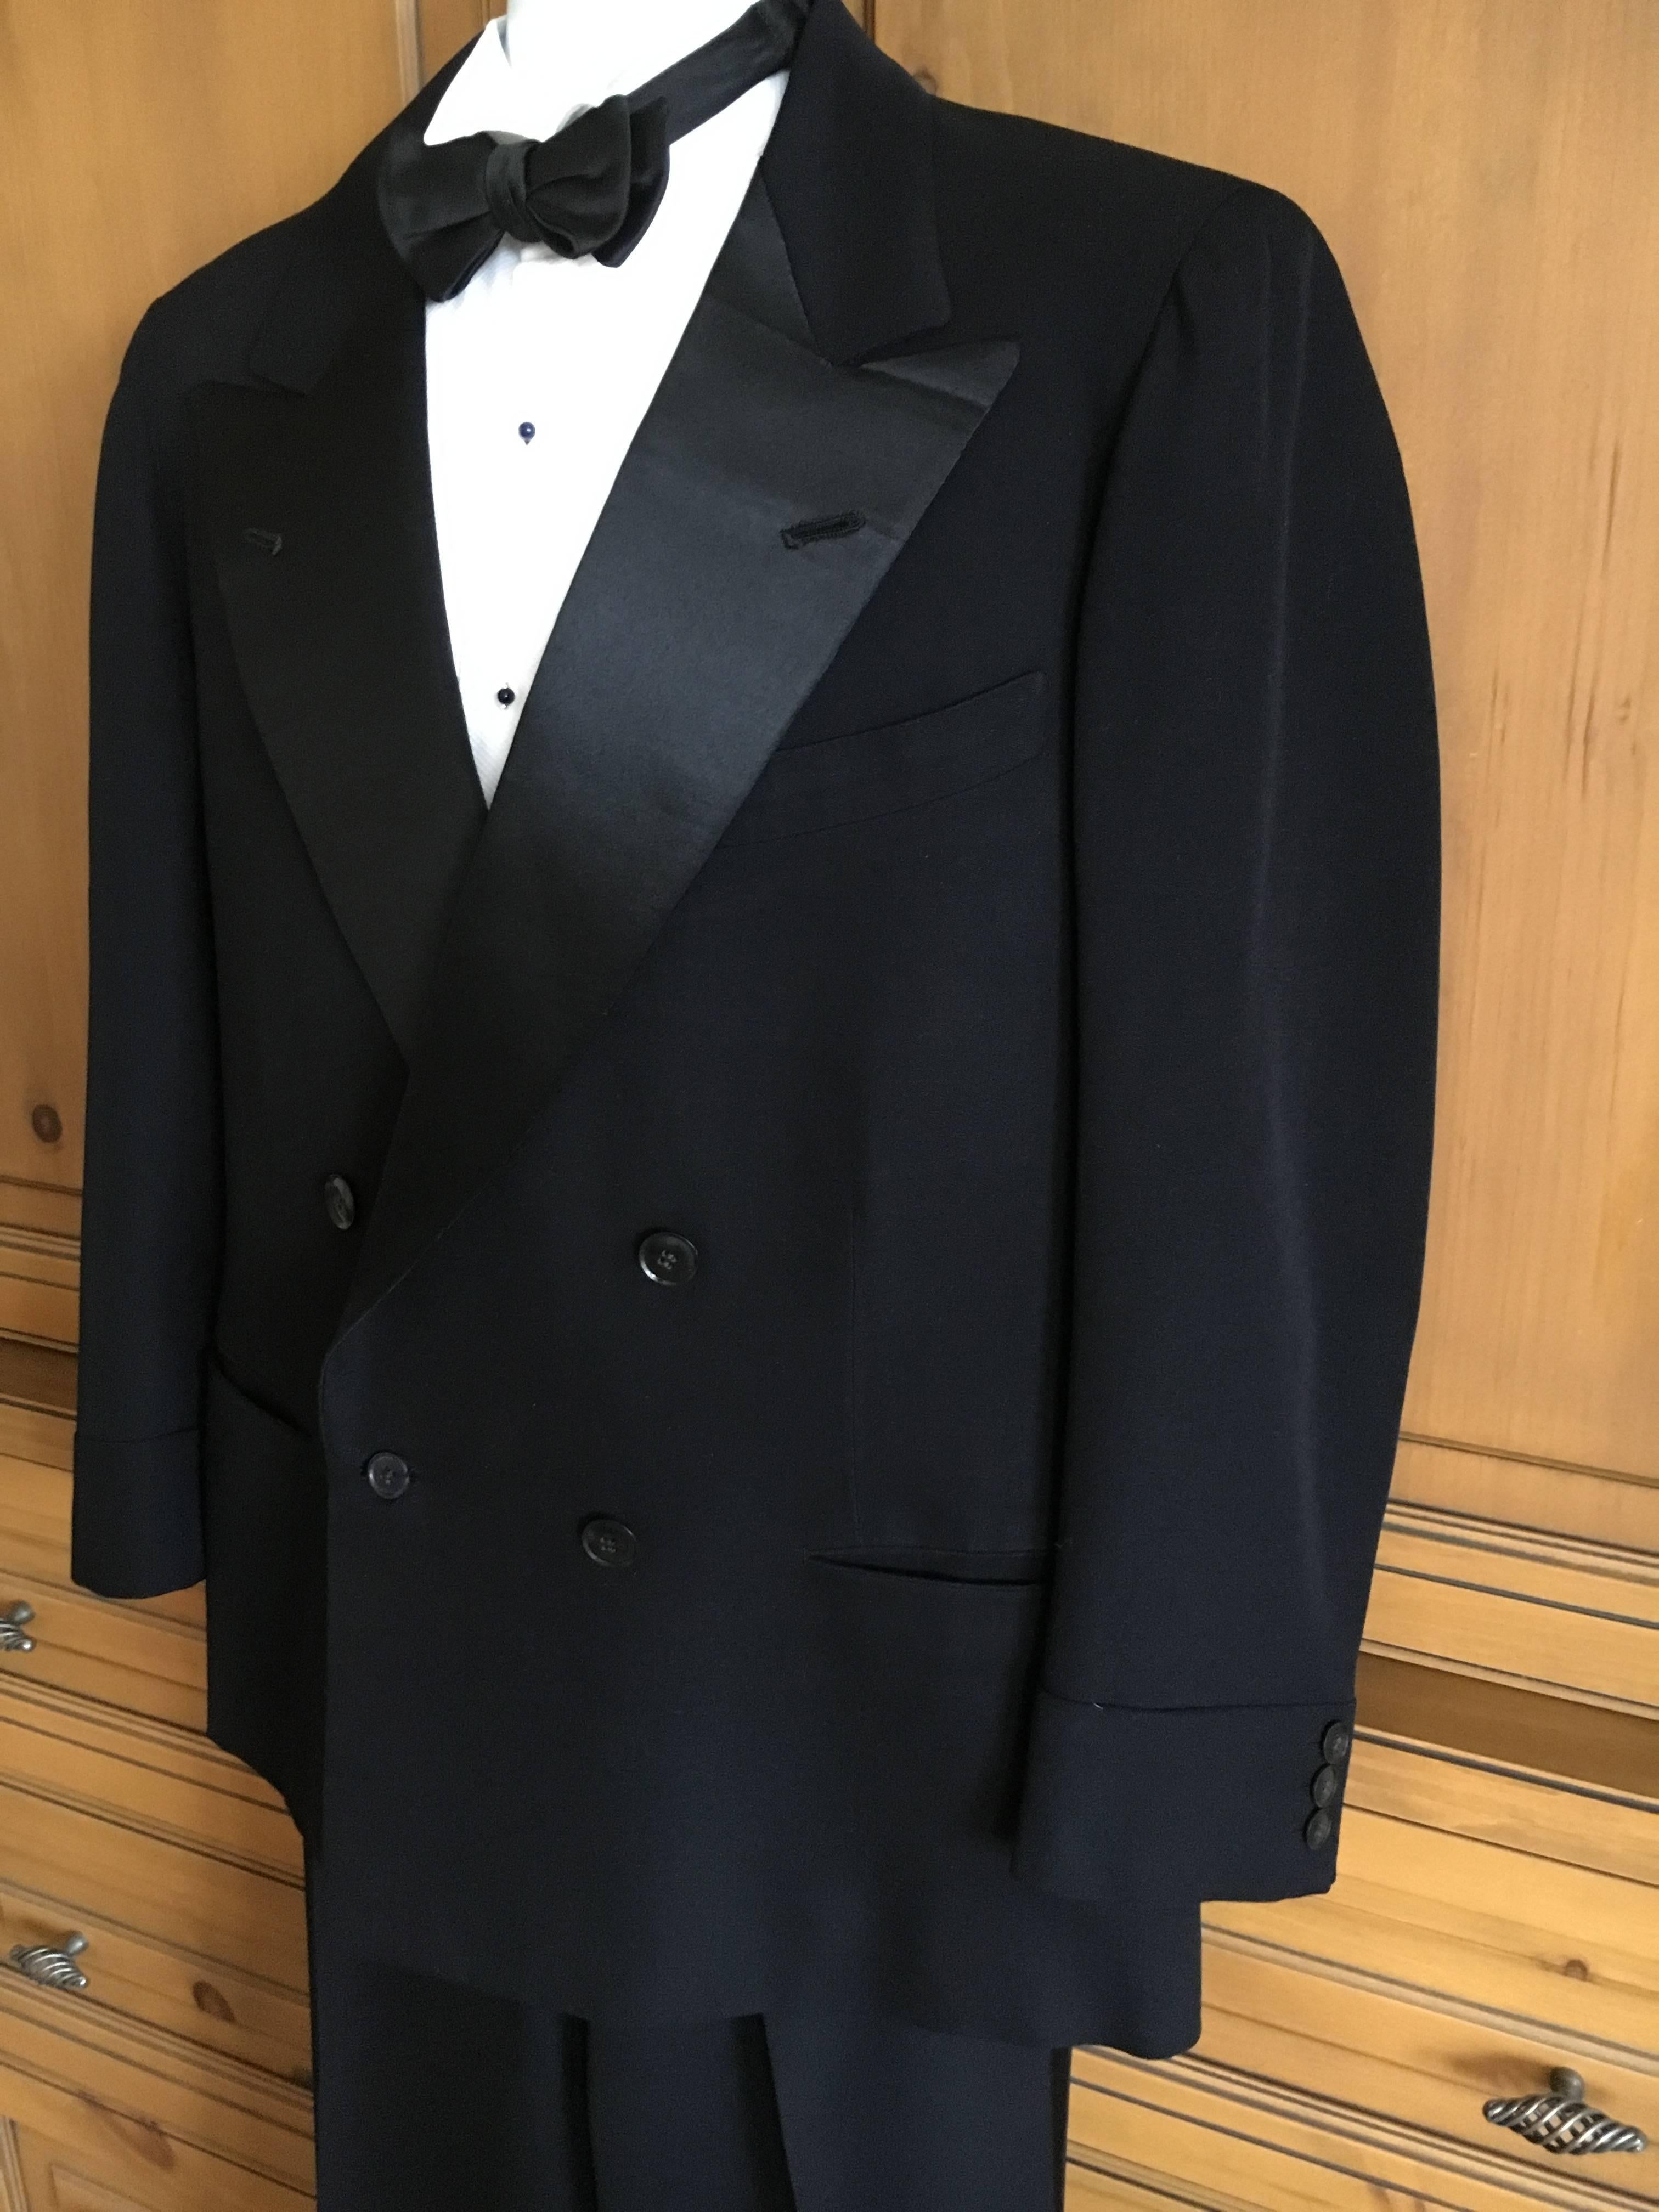 1936 Gentleman's Peak Satin Lapel Tuxedo from Society Tailor F.L. Dunne & Co. NY For Sale 2